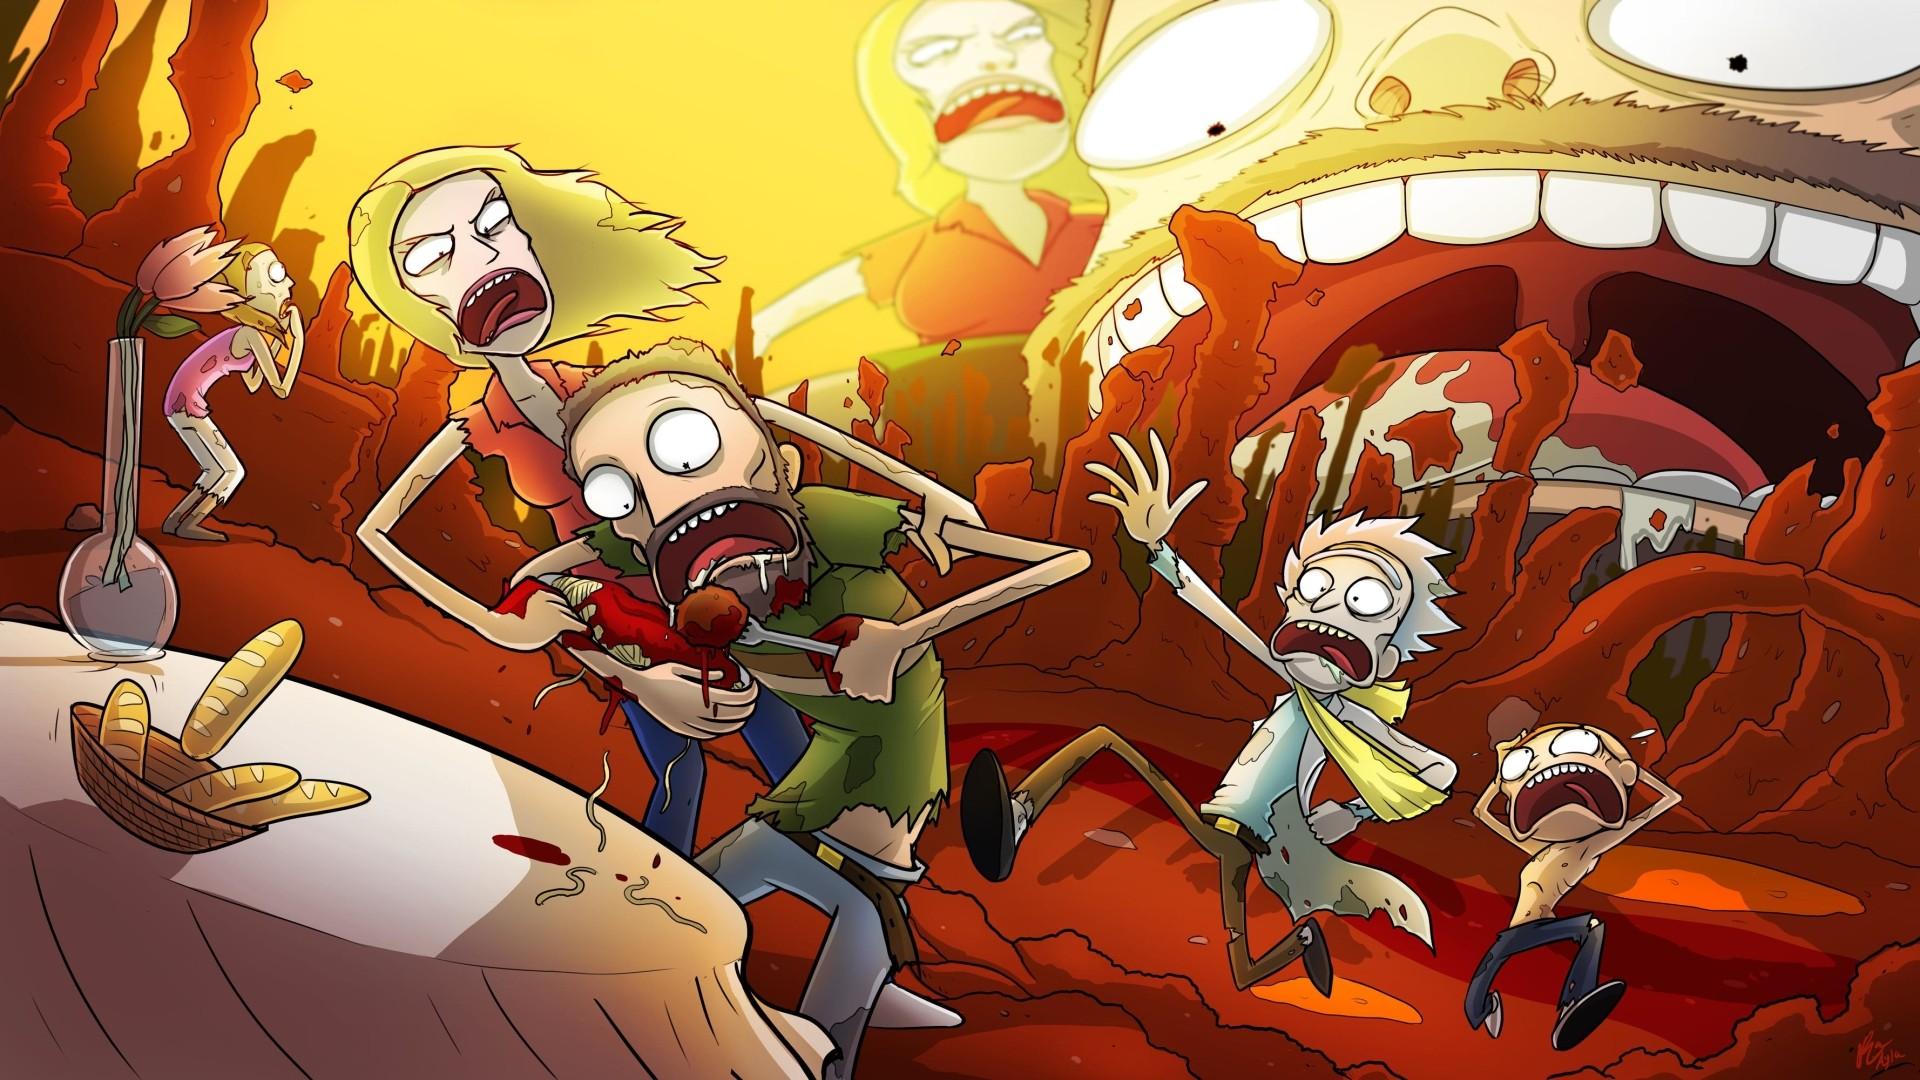 Rick and Morty wallpaper 1080pDownload free stunning